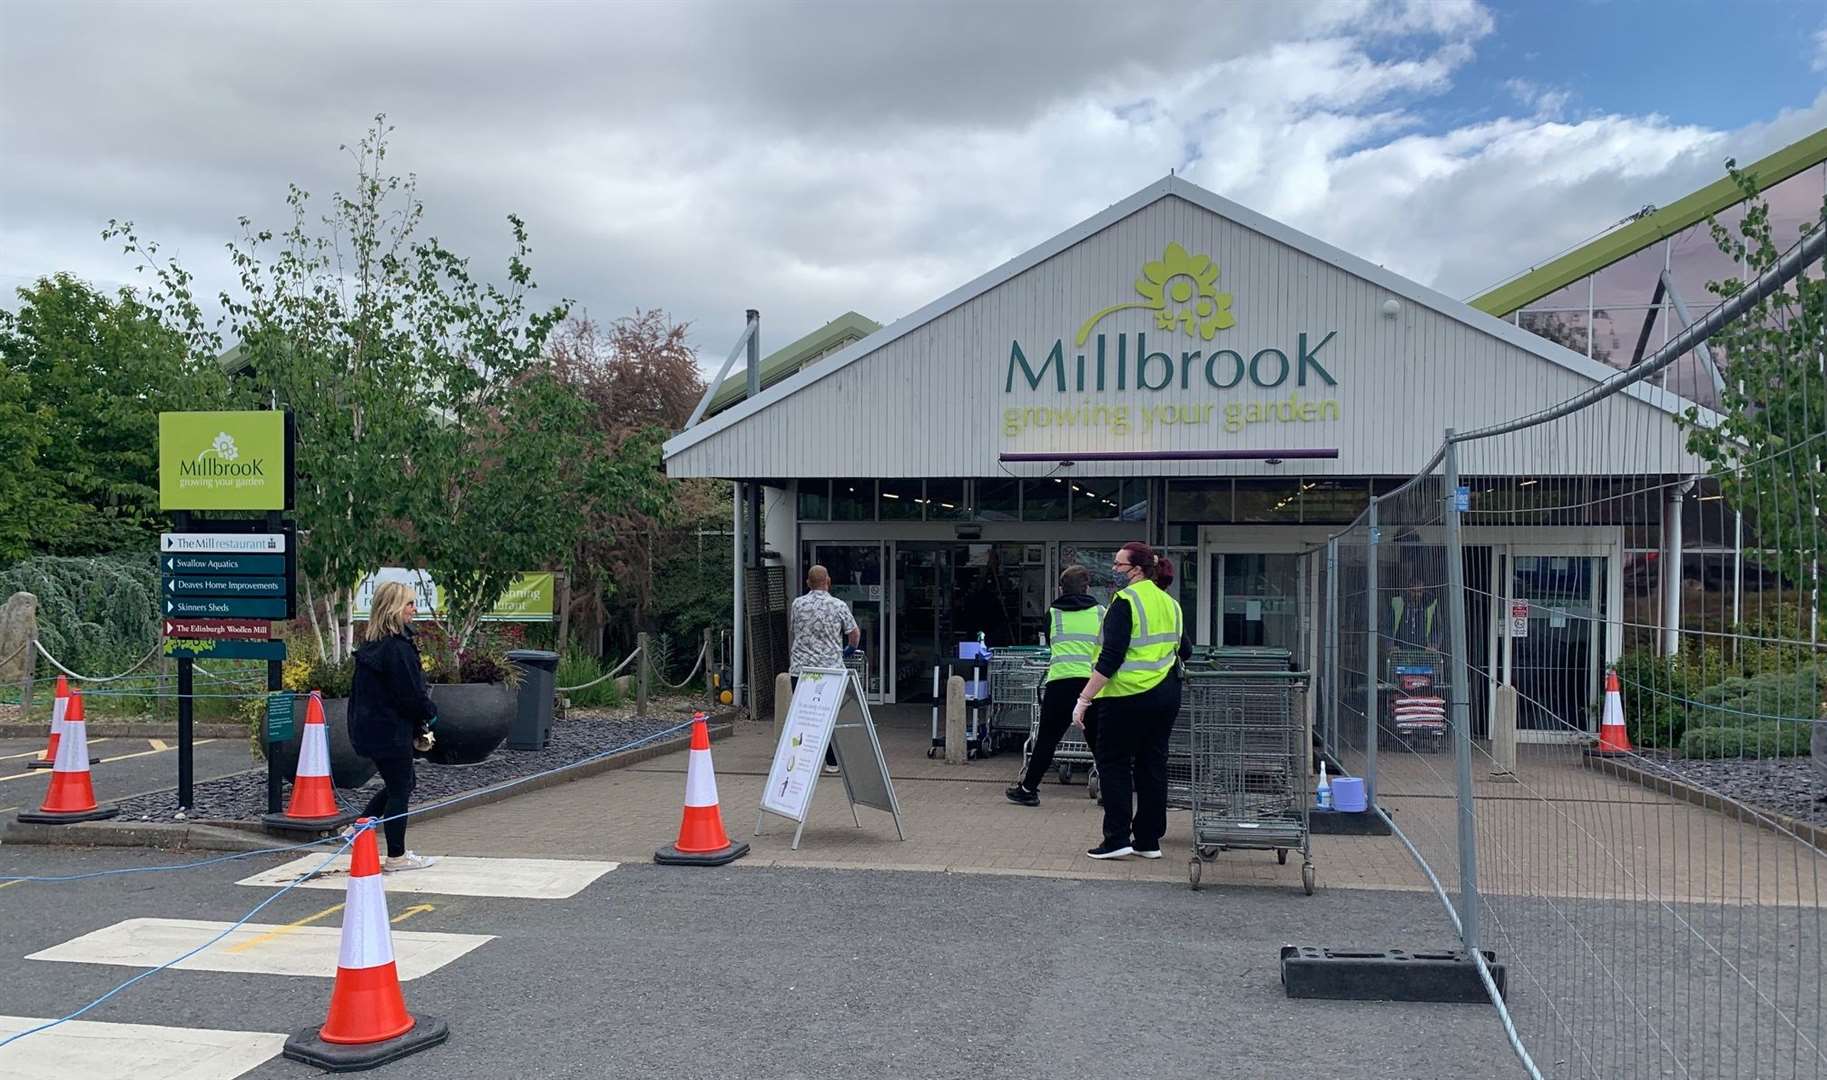 Millbrook Garden Centre has reopened its doors to the public